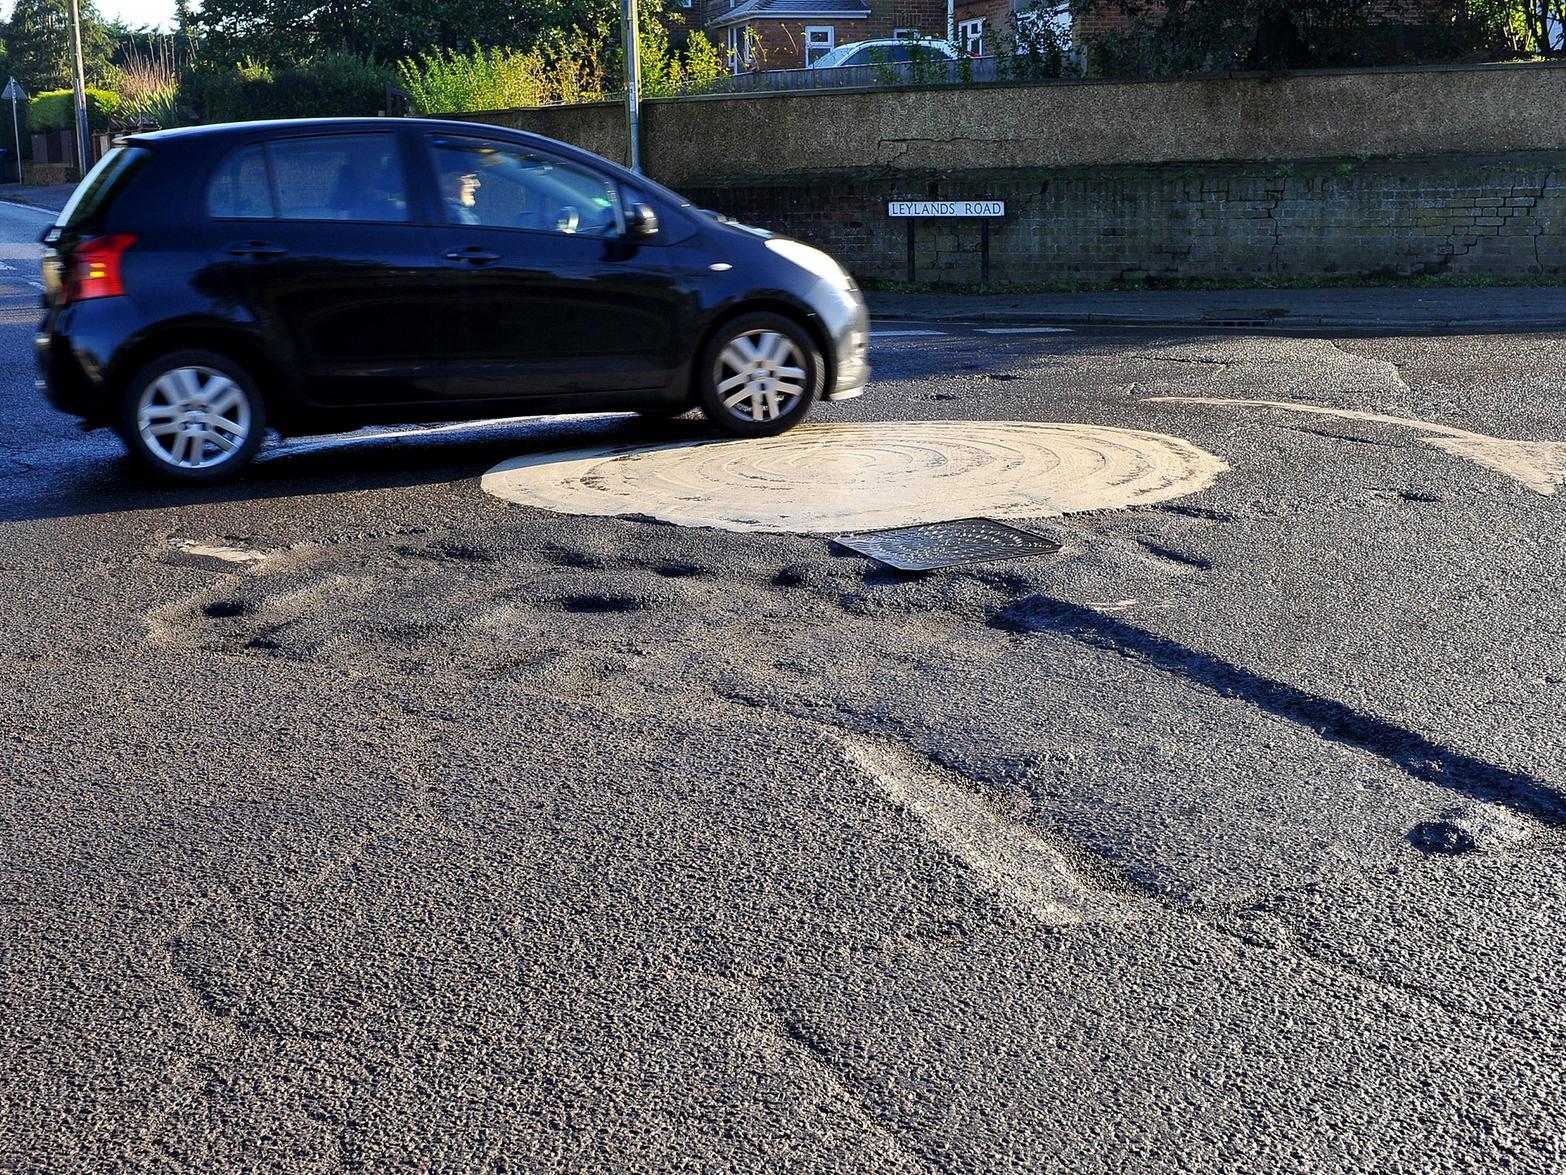 Pot holes on junction of London Road and Leylands Road, Burgess Hill